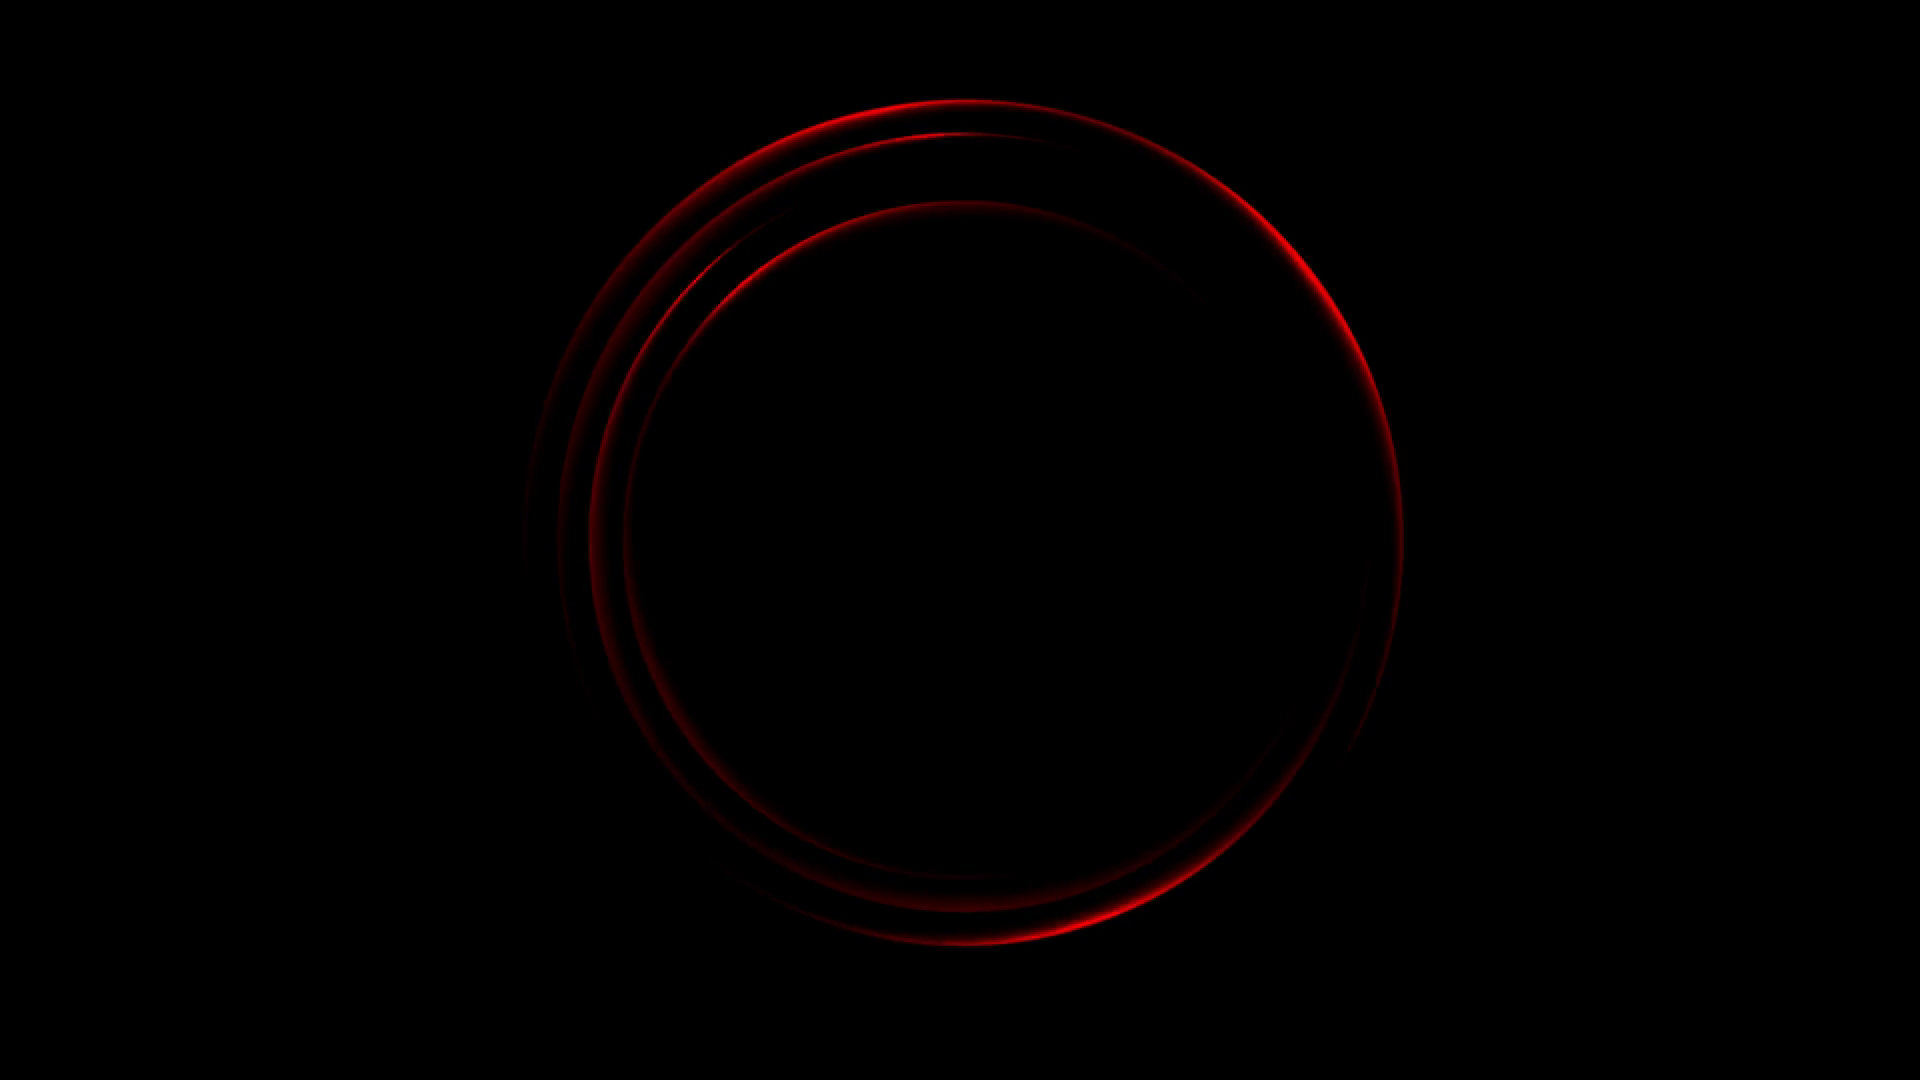 Black And Red Circle Wallpapers - Wallpaper Cave